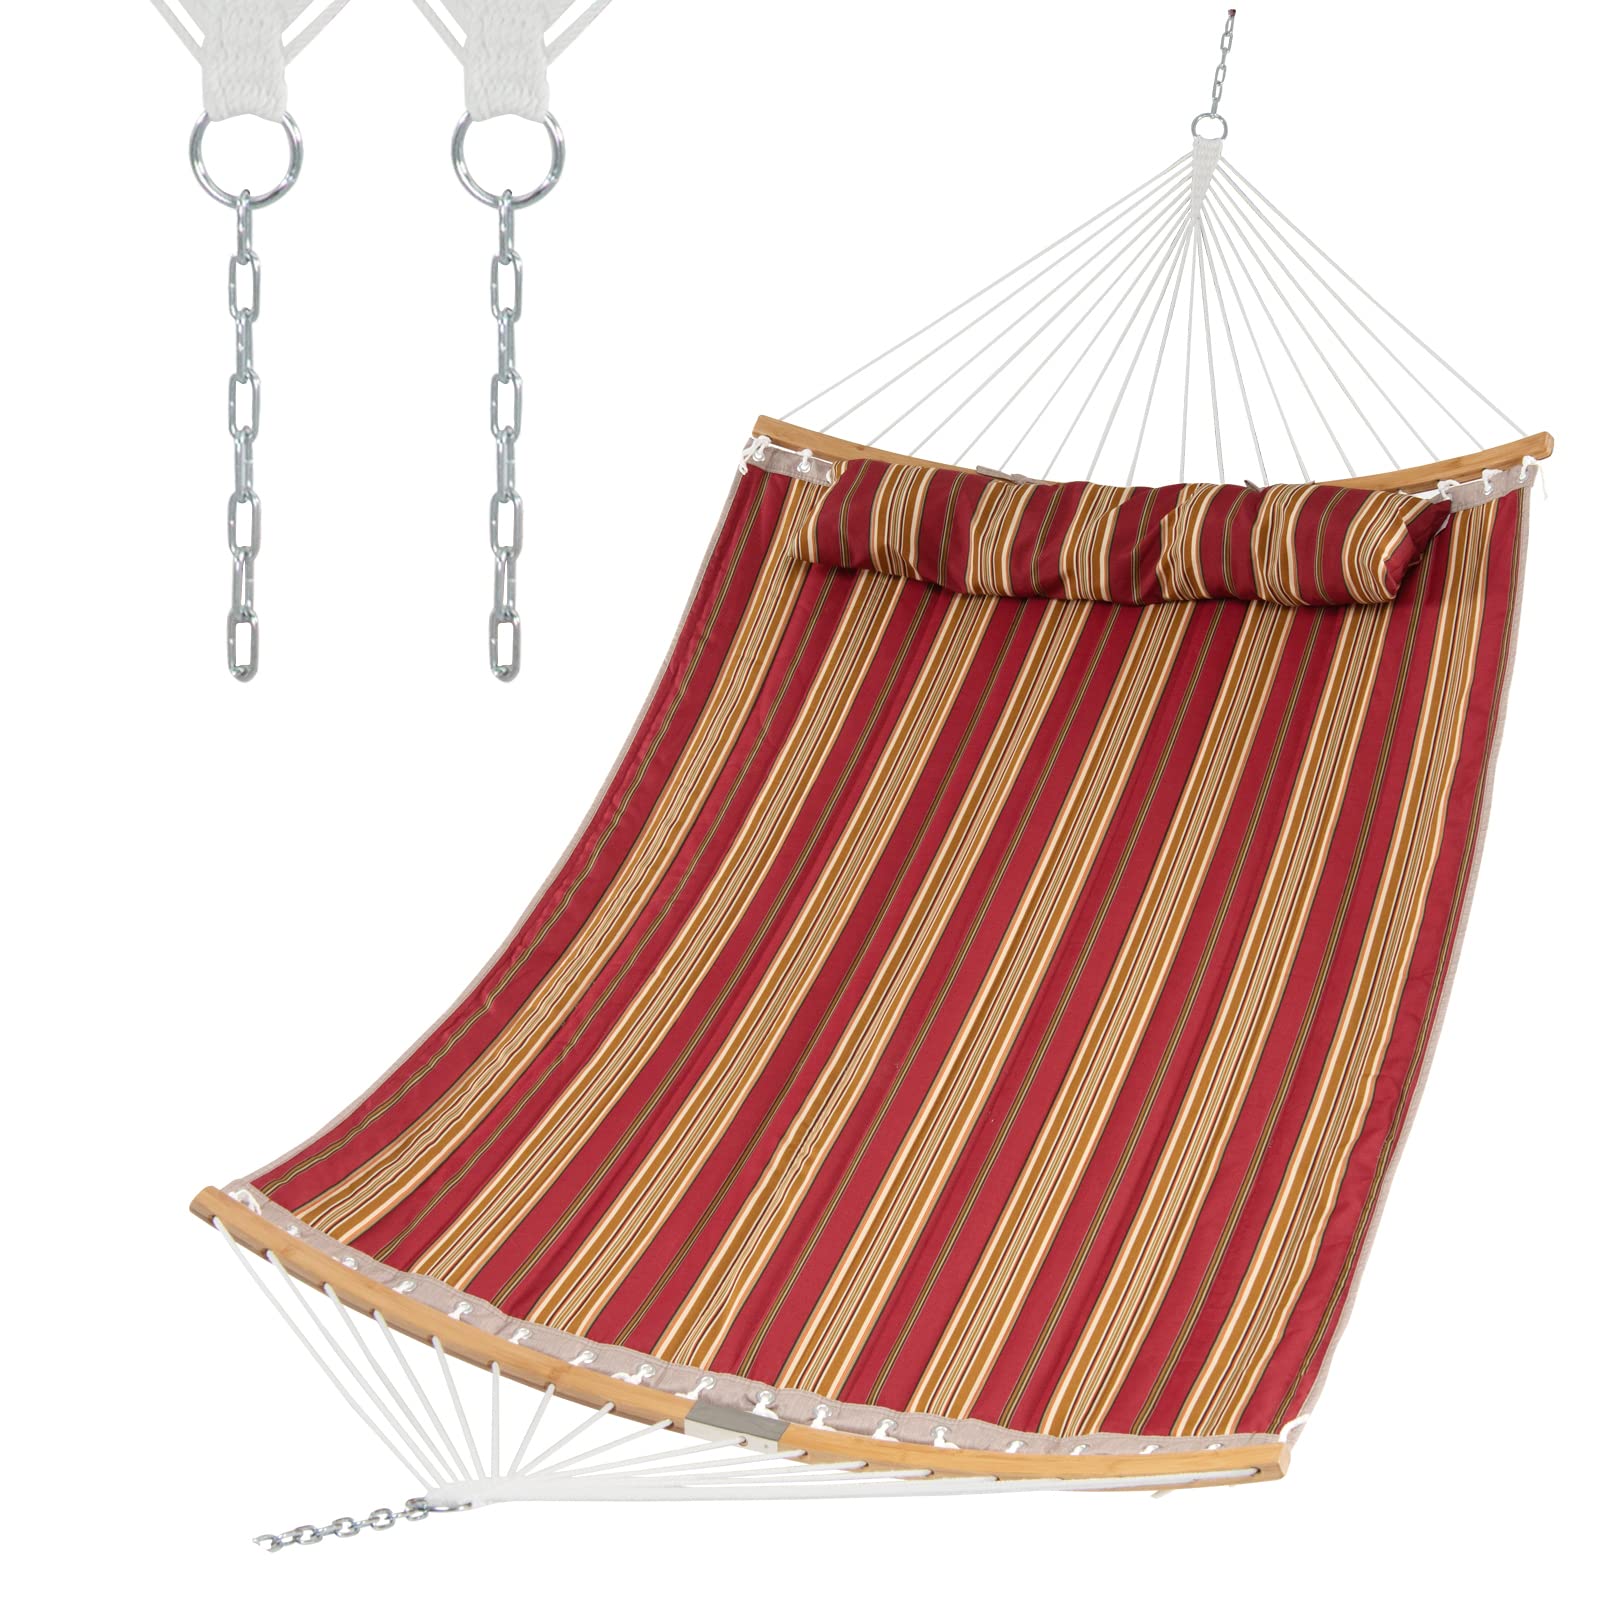 Giantex Hammock with Detachable Pillow Outdoor Hanging Chair (Hammock Stand Not Included)